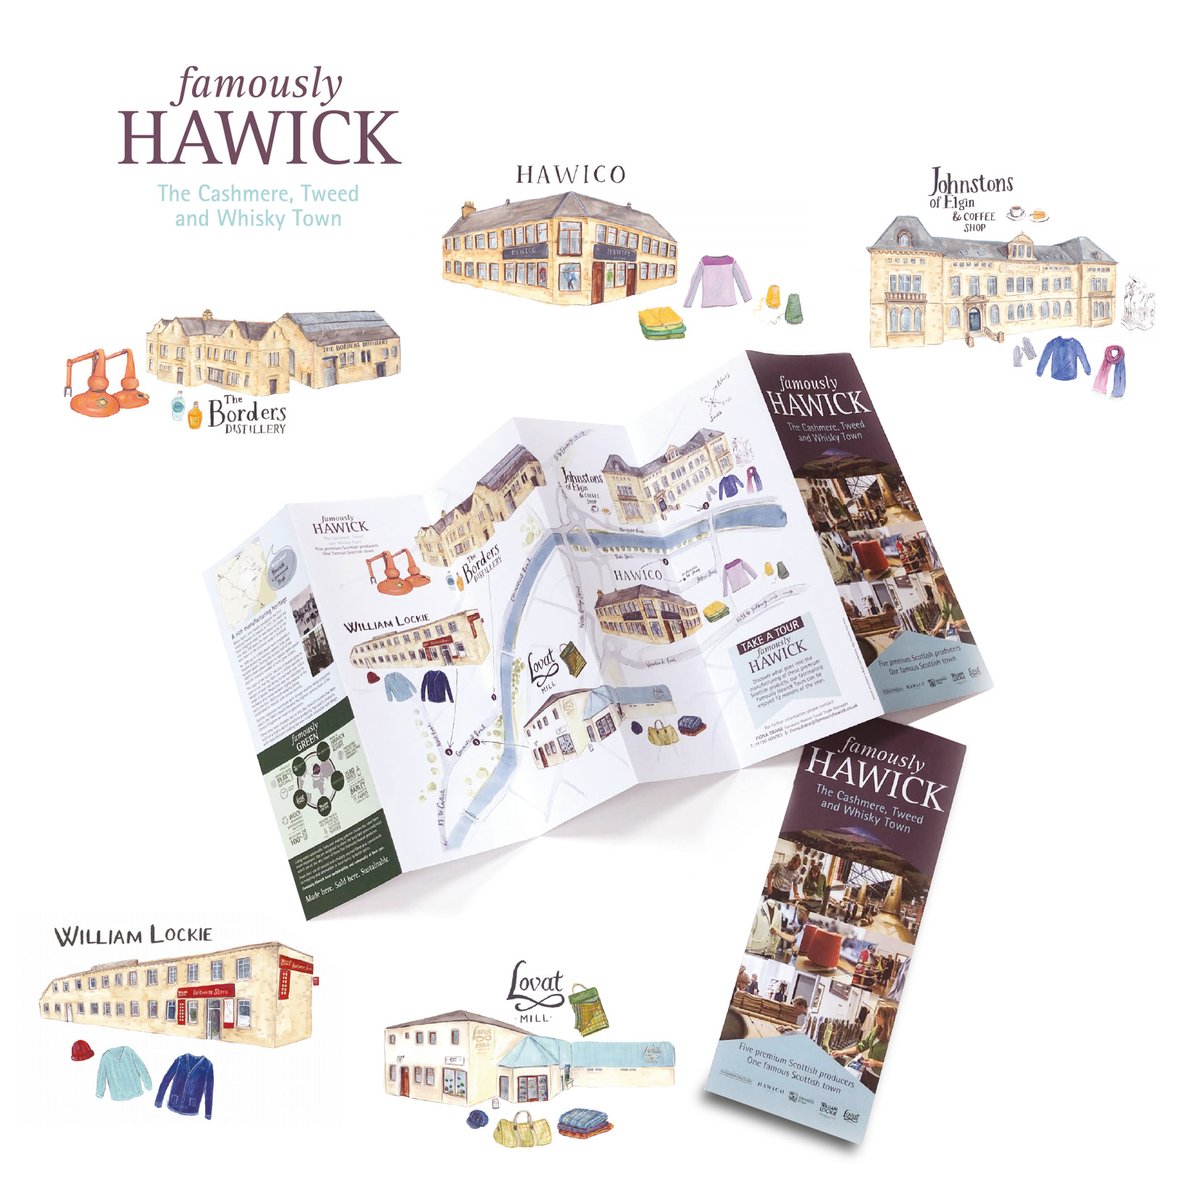 Did you know? At William Lockie each garment goes through approximately 30 processes of machinery and handwork until completion, including hand sewing, stitching, hand knitting and body linking. The shop is open Monday to Saturday 9-5 #FamouslyHawick #madeheresoldhere